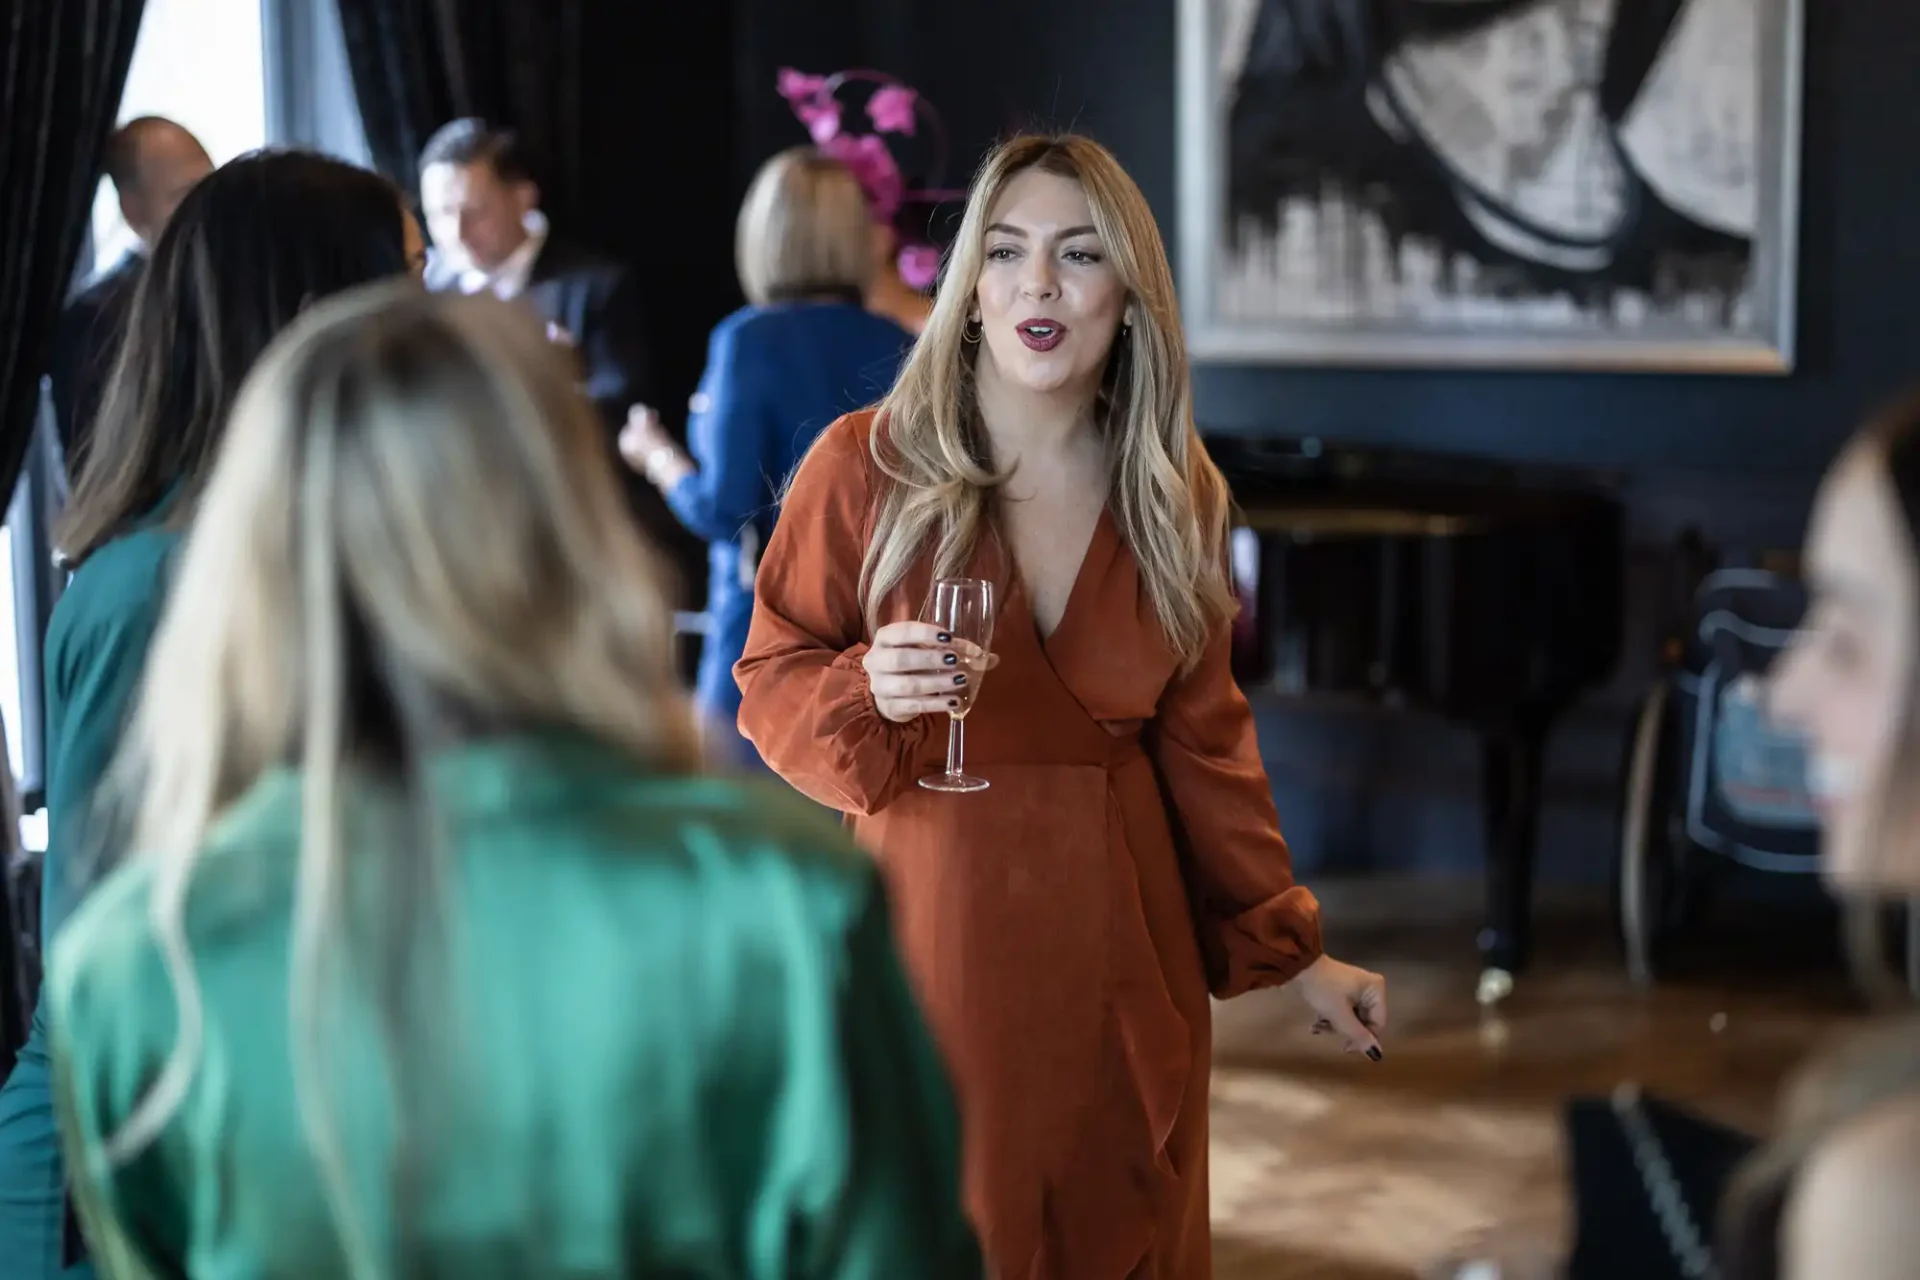 Woman in an orange dress holding a wine glass, conversing with others at a social event indoors.